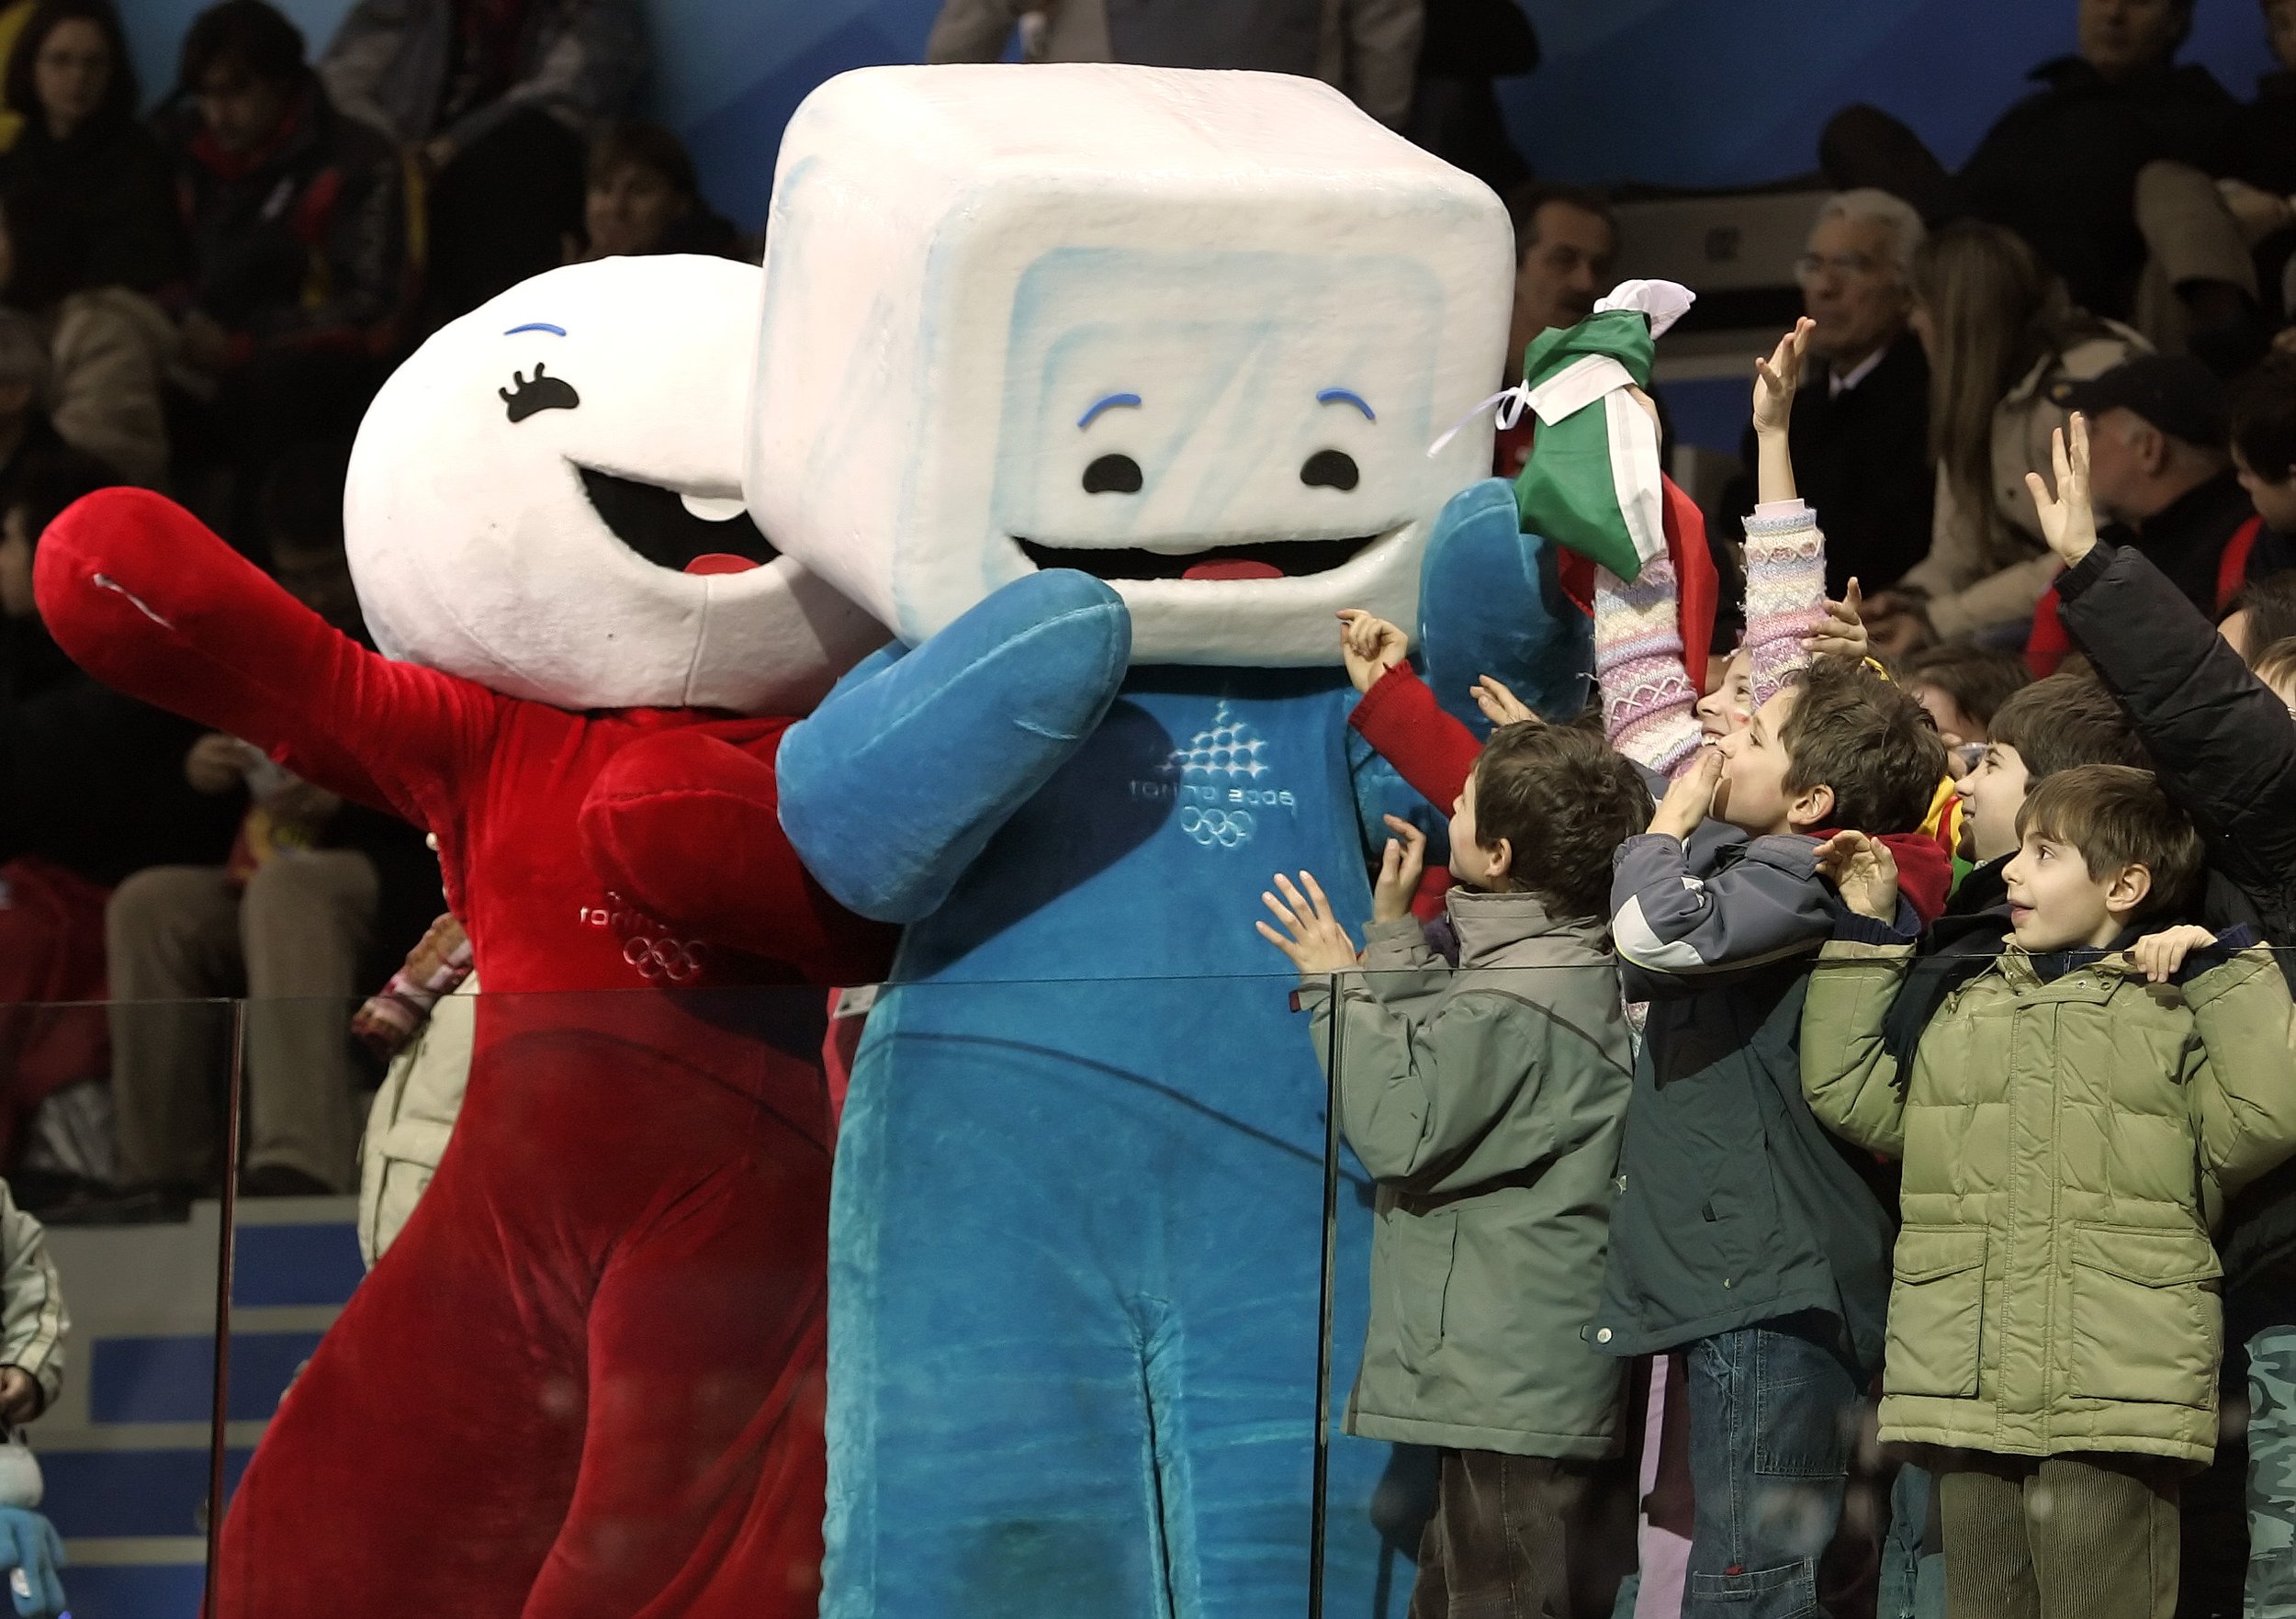  Children attending the short track skating races in the Palavela Arena cheer with Torino Olympic mascots Neve, left and Gliz at the 2006 Winter Olympics in Turin, Italy, Feb. 15, 2006.  (AP Photo/Amy Sancetta) 